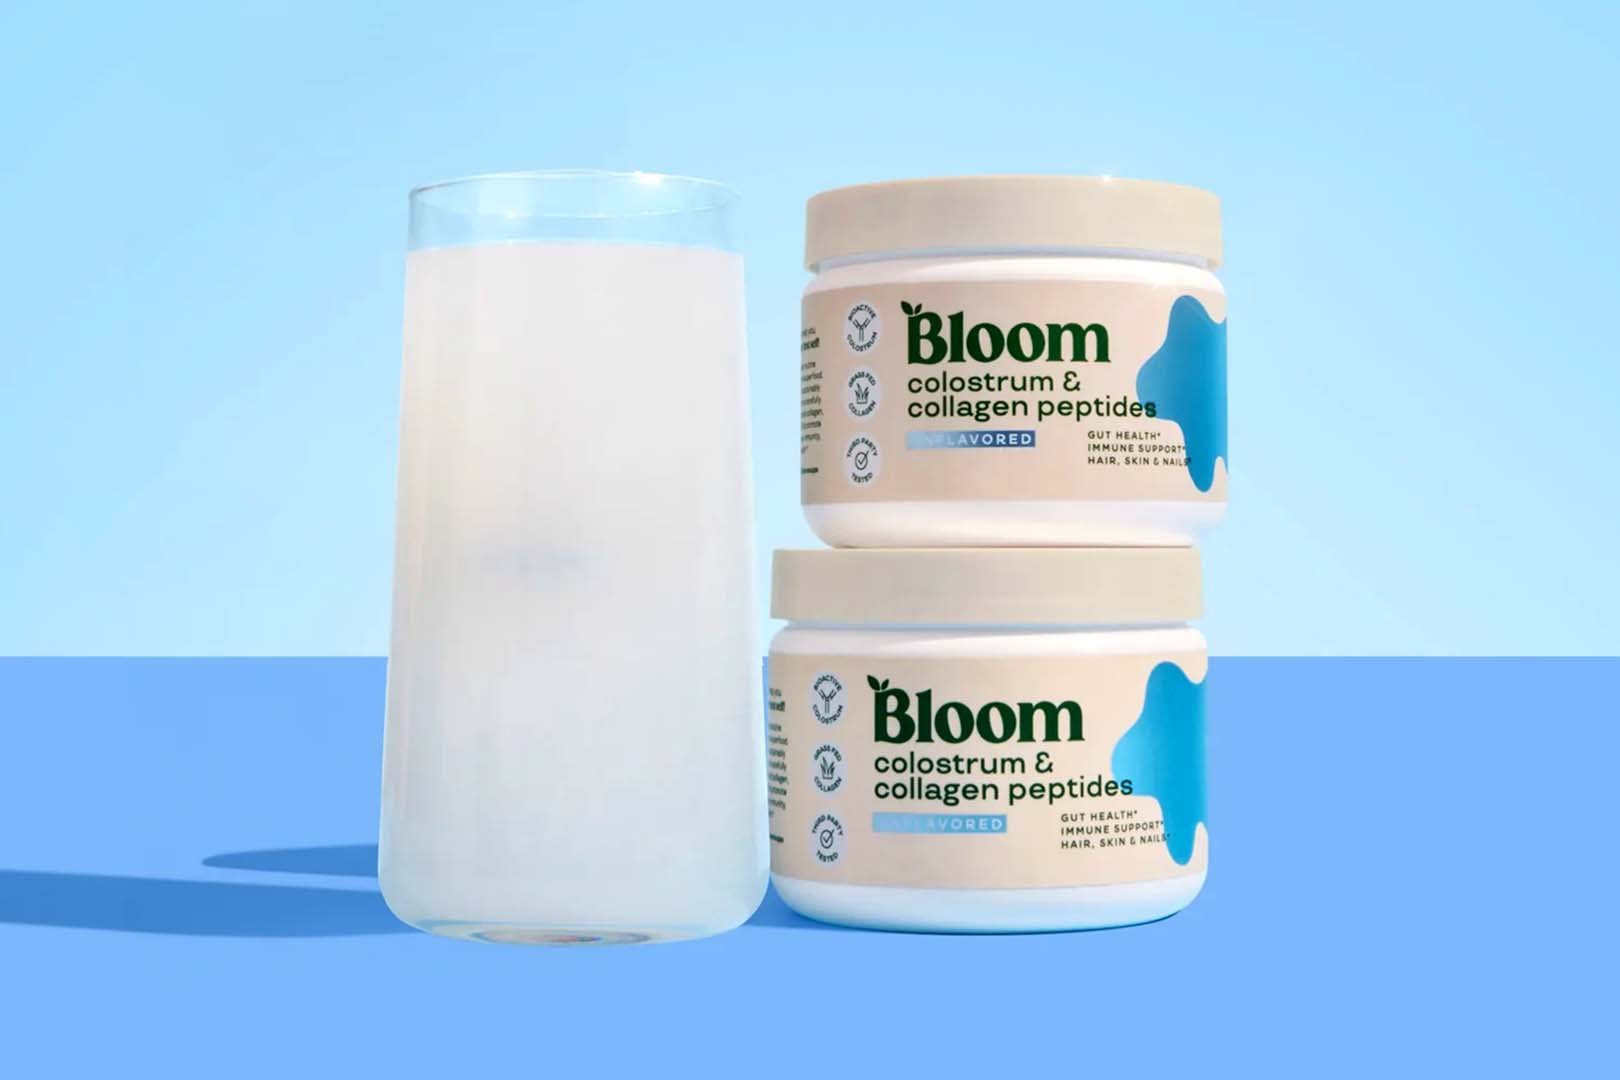 Bloom Colostrum And Collagen Peptides